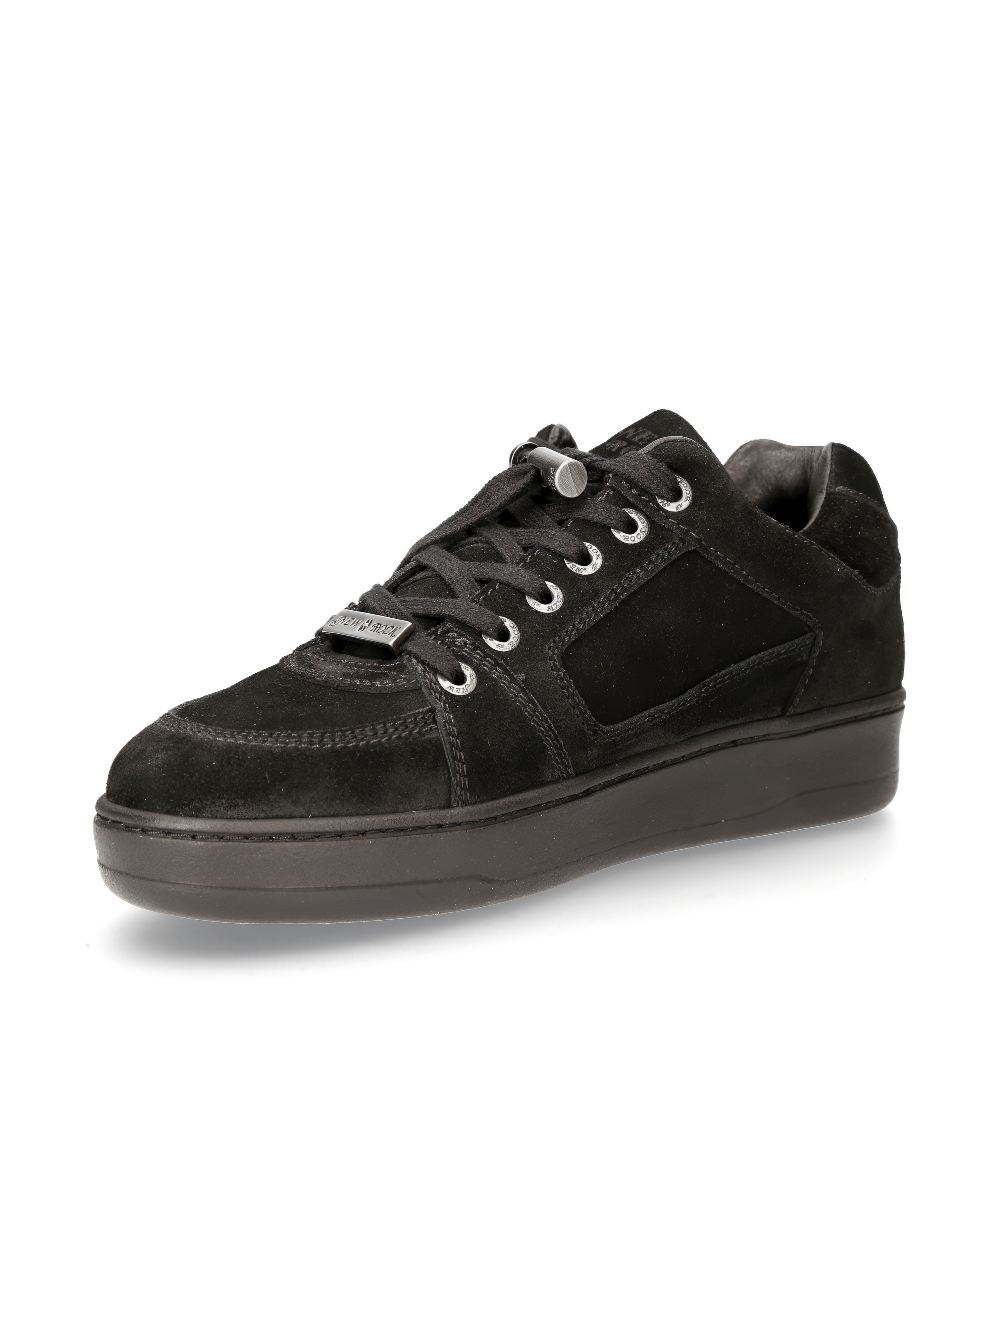 NEW ROCK Unisex Black Punk-Inspired Sneakers Shoes